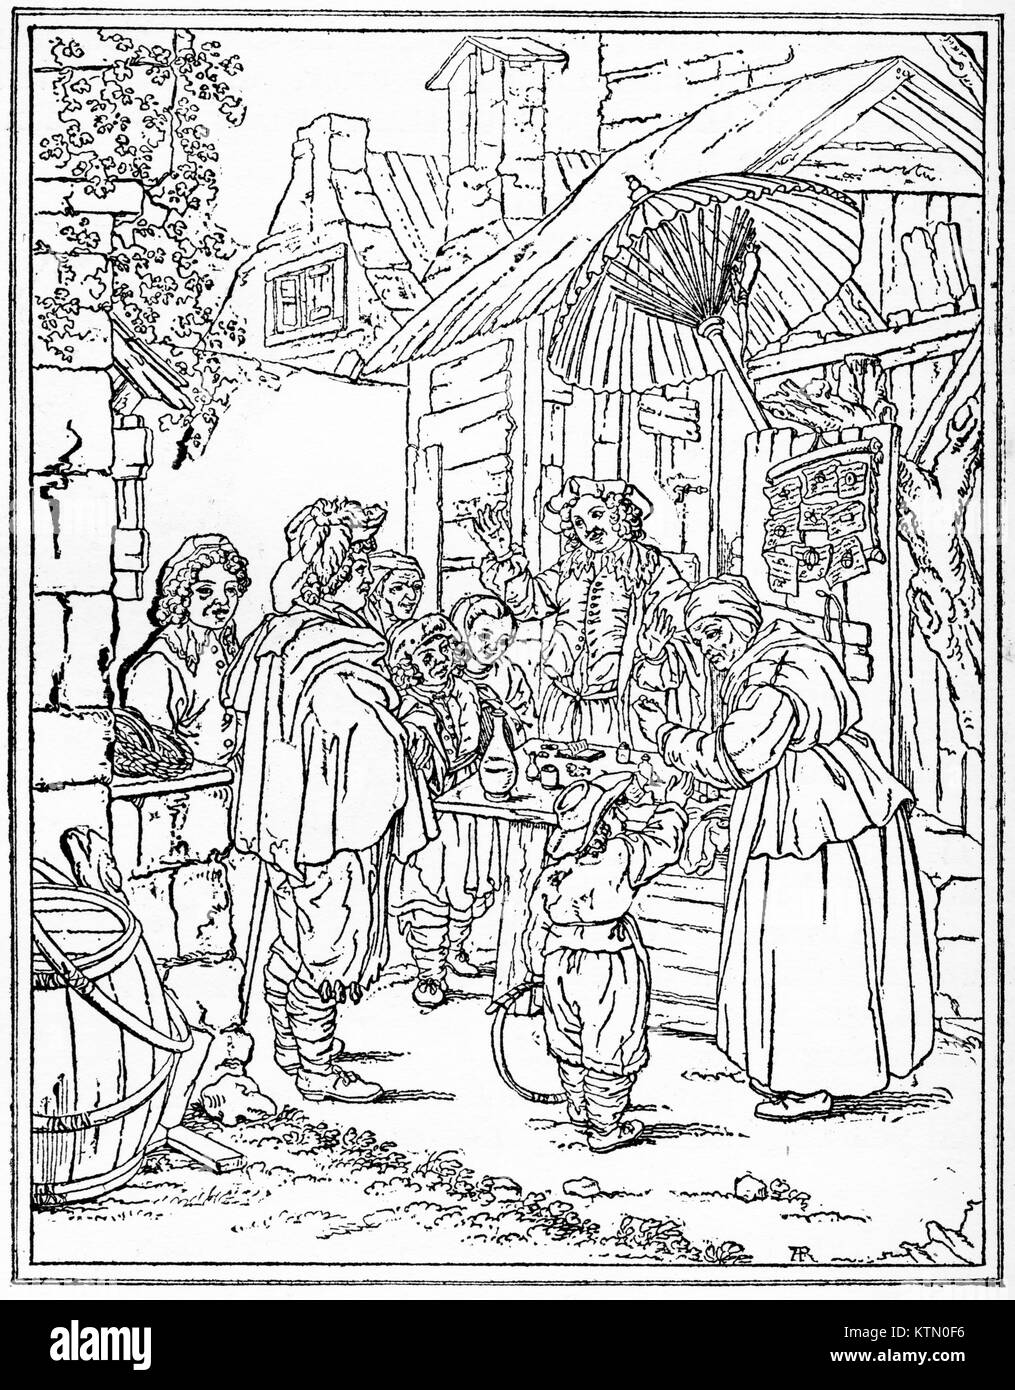 Engraving of a 17th century street scene, The Charlatan, from a painting by Franz von Mieris. From an original engraving in the Historian's History of the World, 1908 Stock Photo